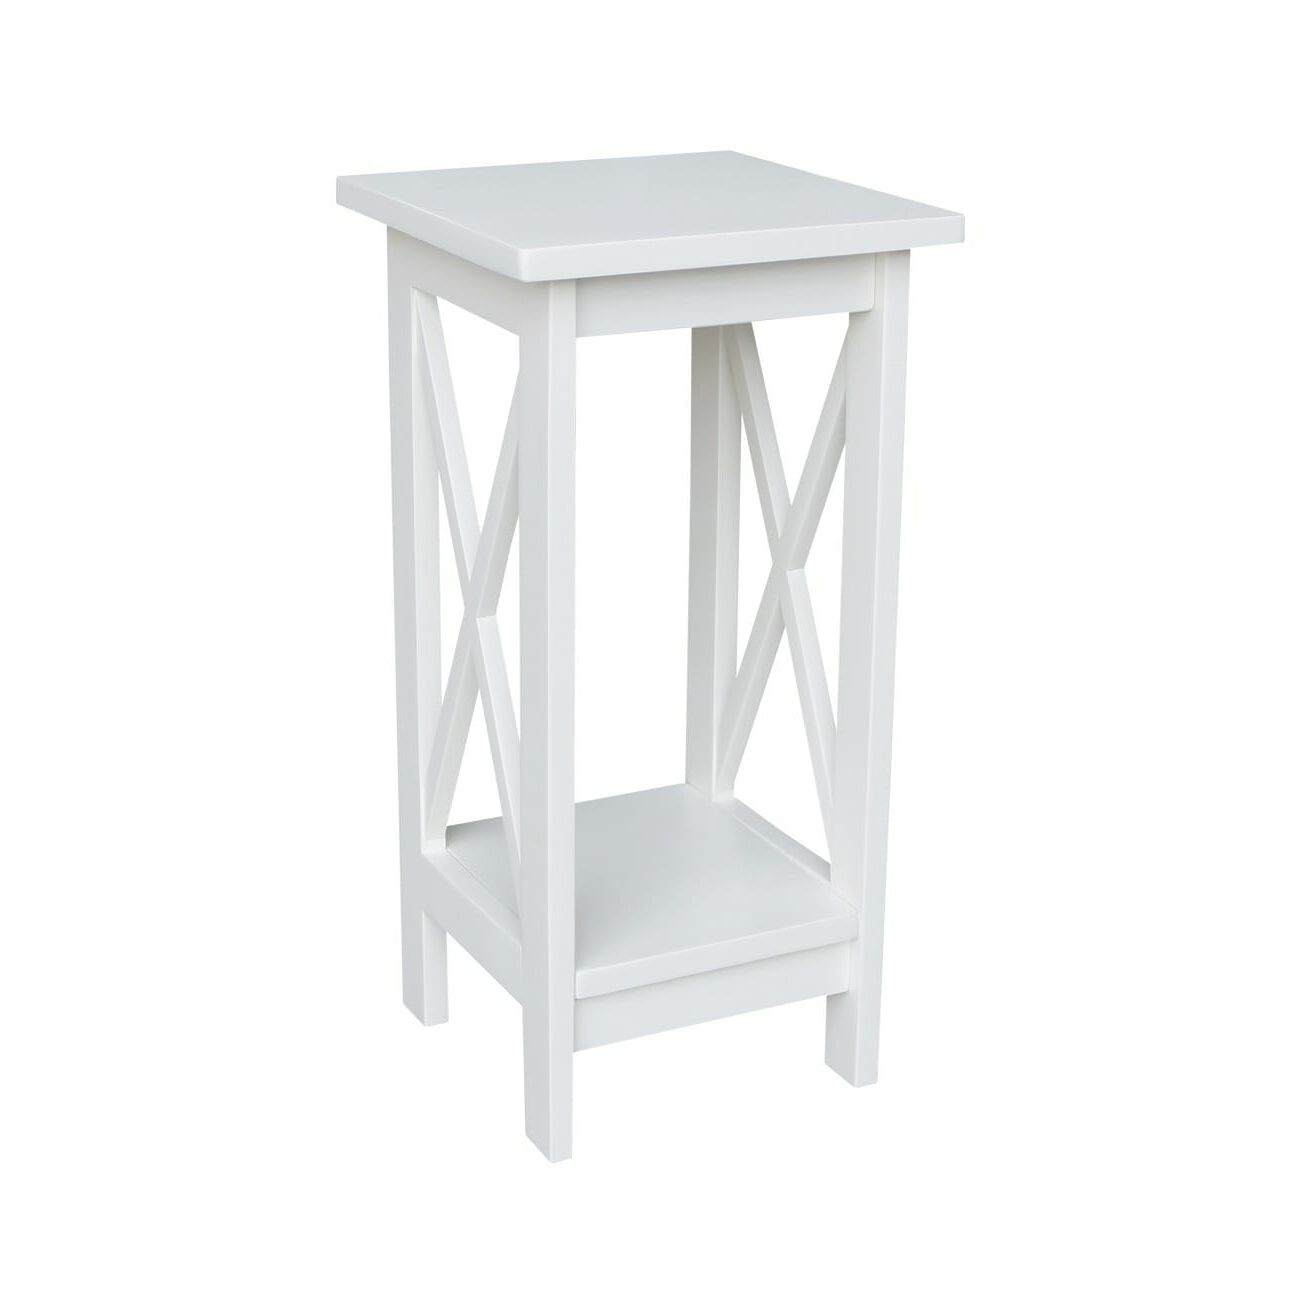 3071x 24 Inch Tall X Sided Plant Stand (View 9 of 15)